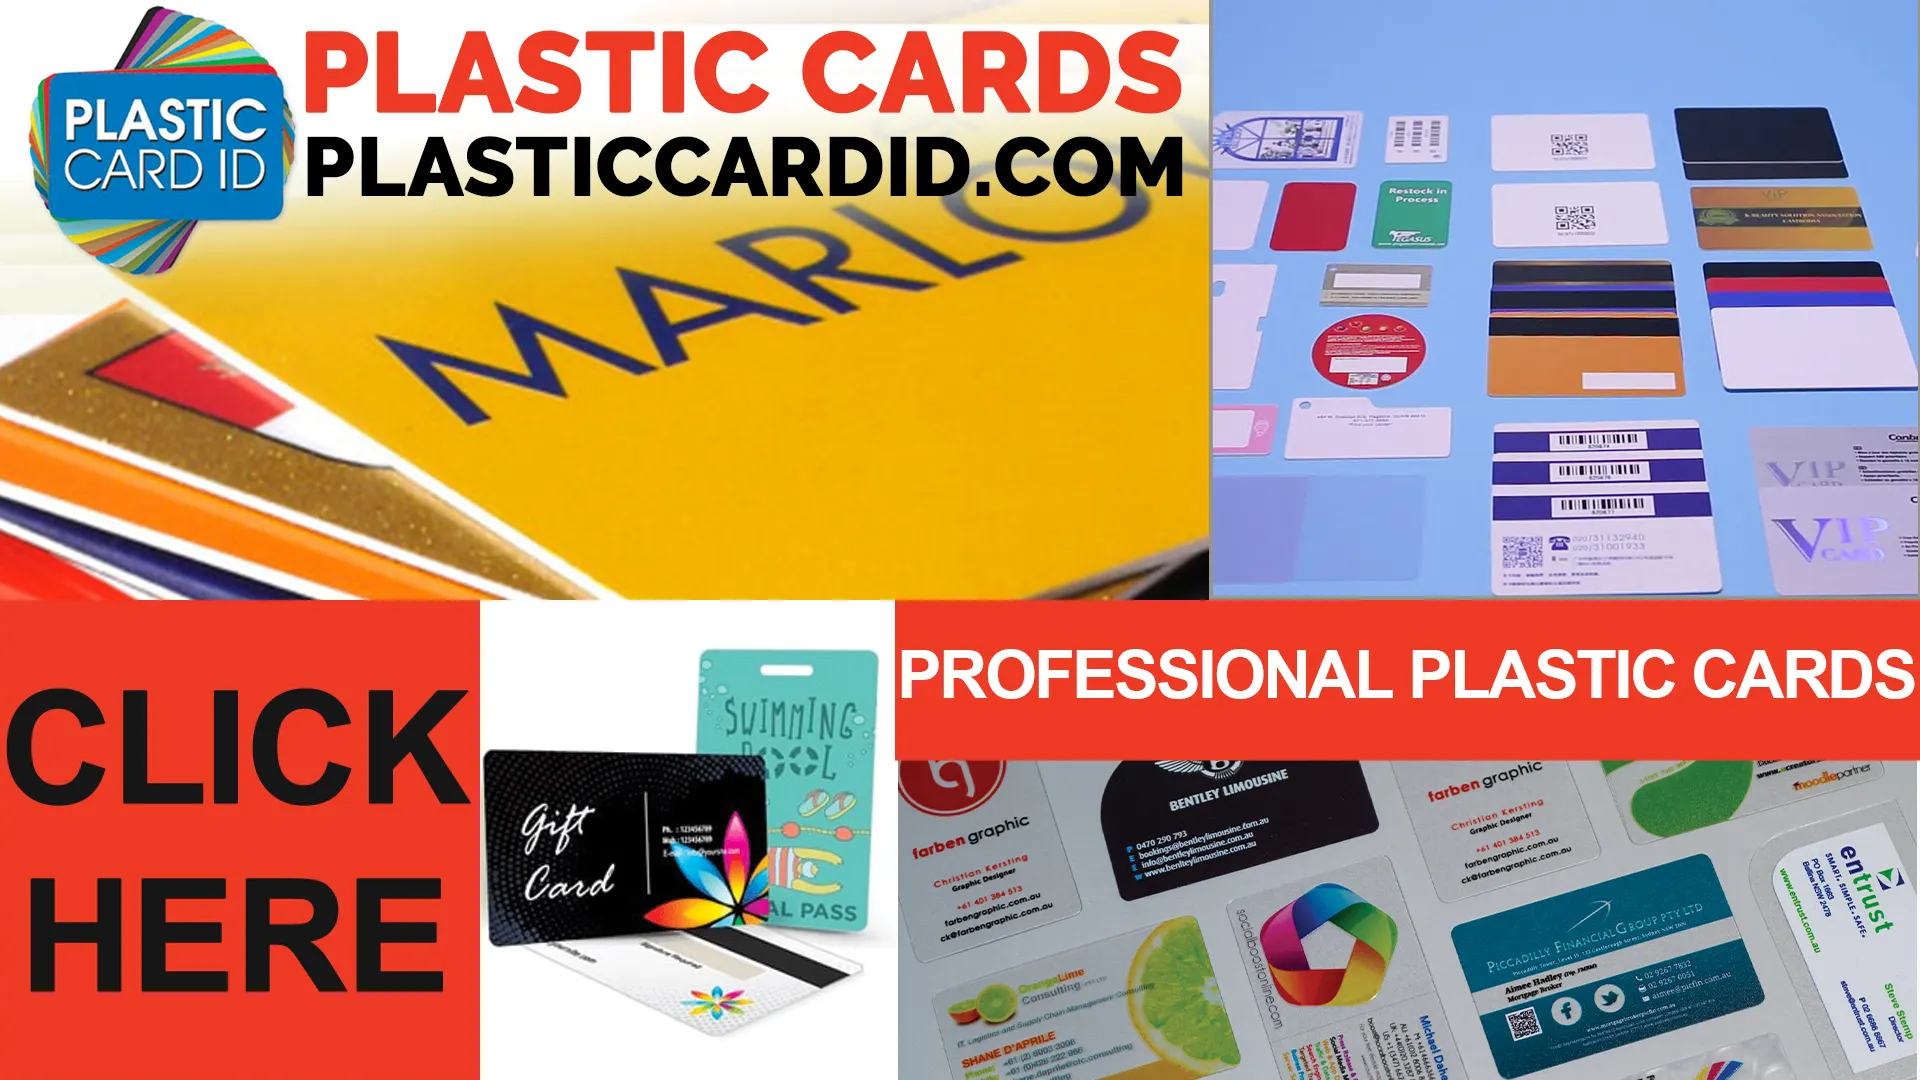 Plastic Cards that Rise Above the Rest